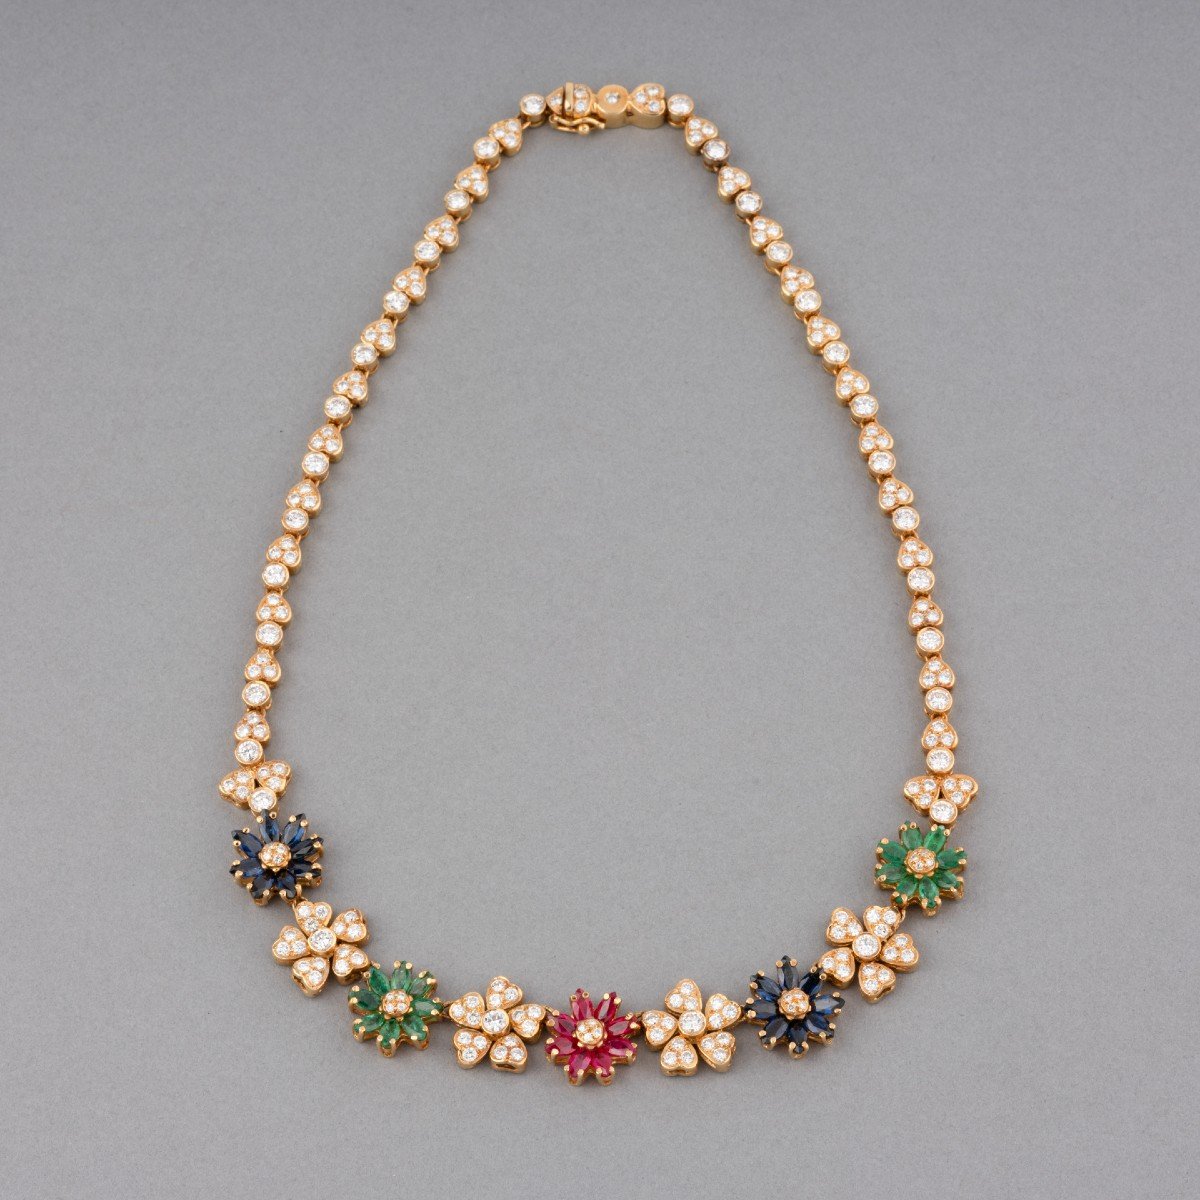 Vintage Gold And Precious Stone Necklace By Michalis